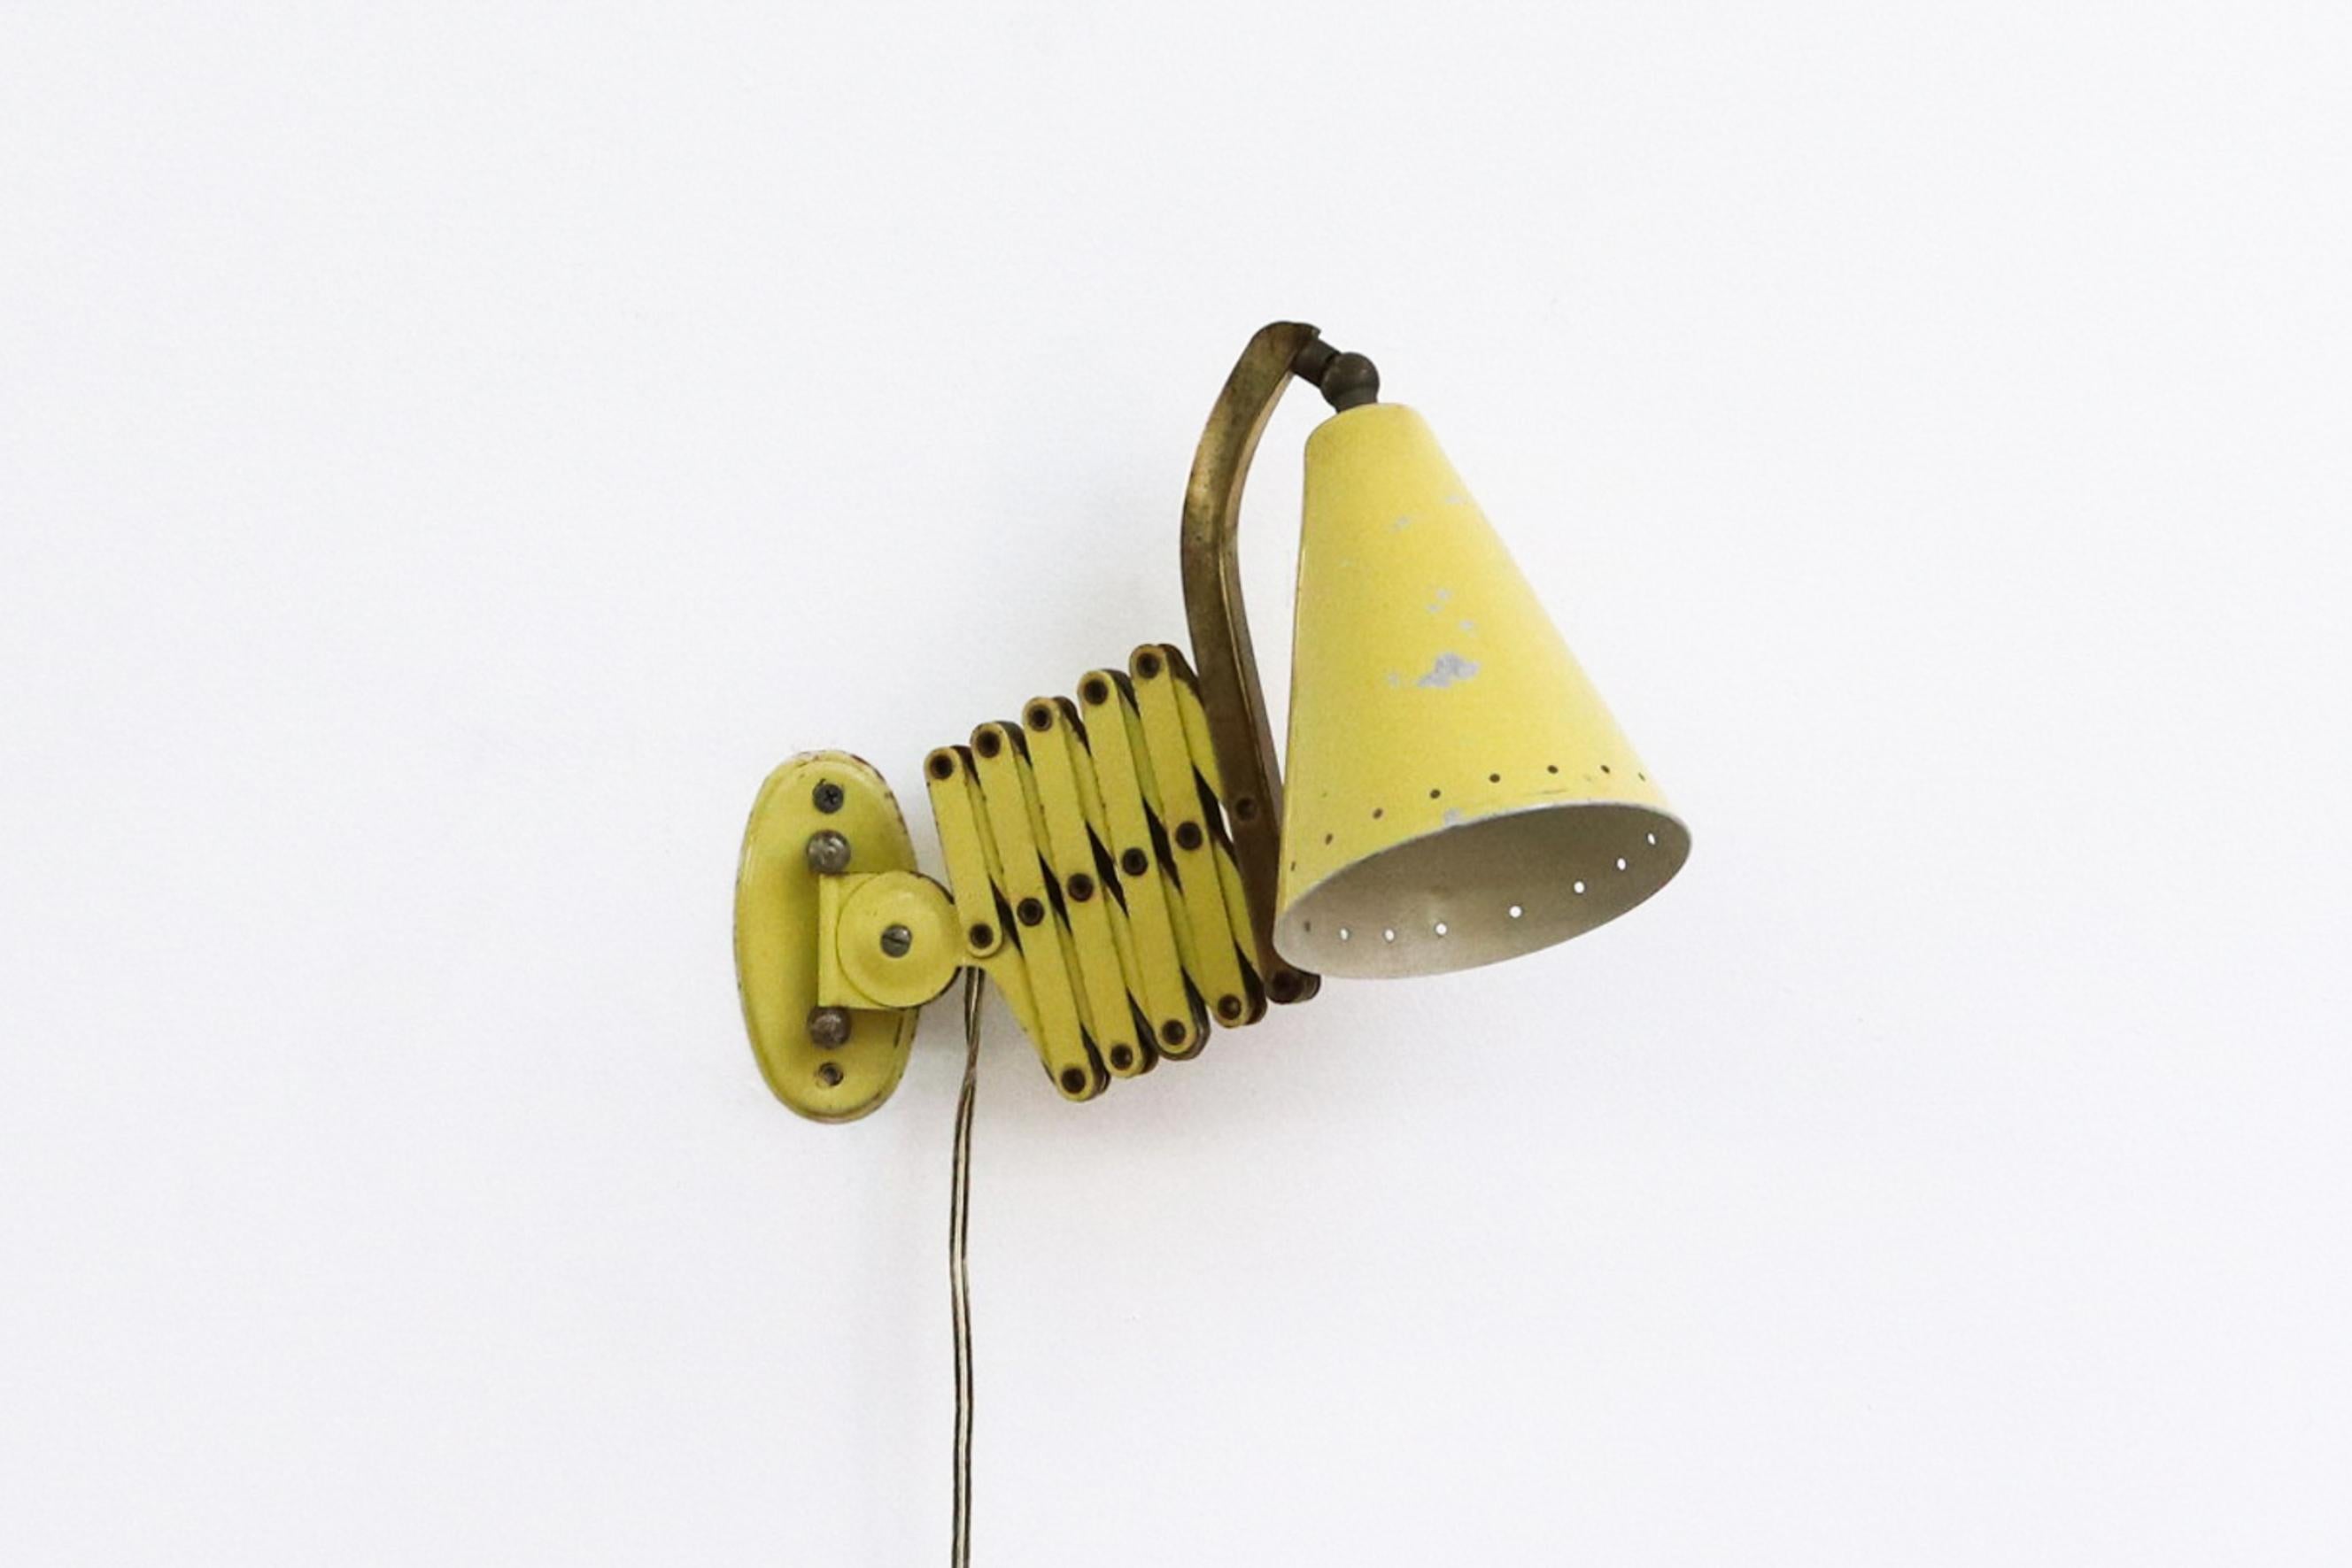 Pale yellow Enameled Hala Zeist scissor arm wall mount lamp with perforated shade and brass hardware. In original condition with visible wear including some enamel loss, Wear is consistent with age and use.